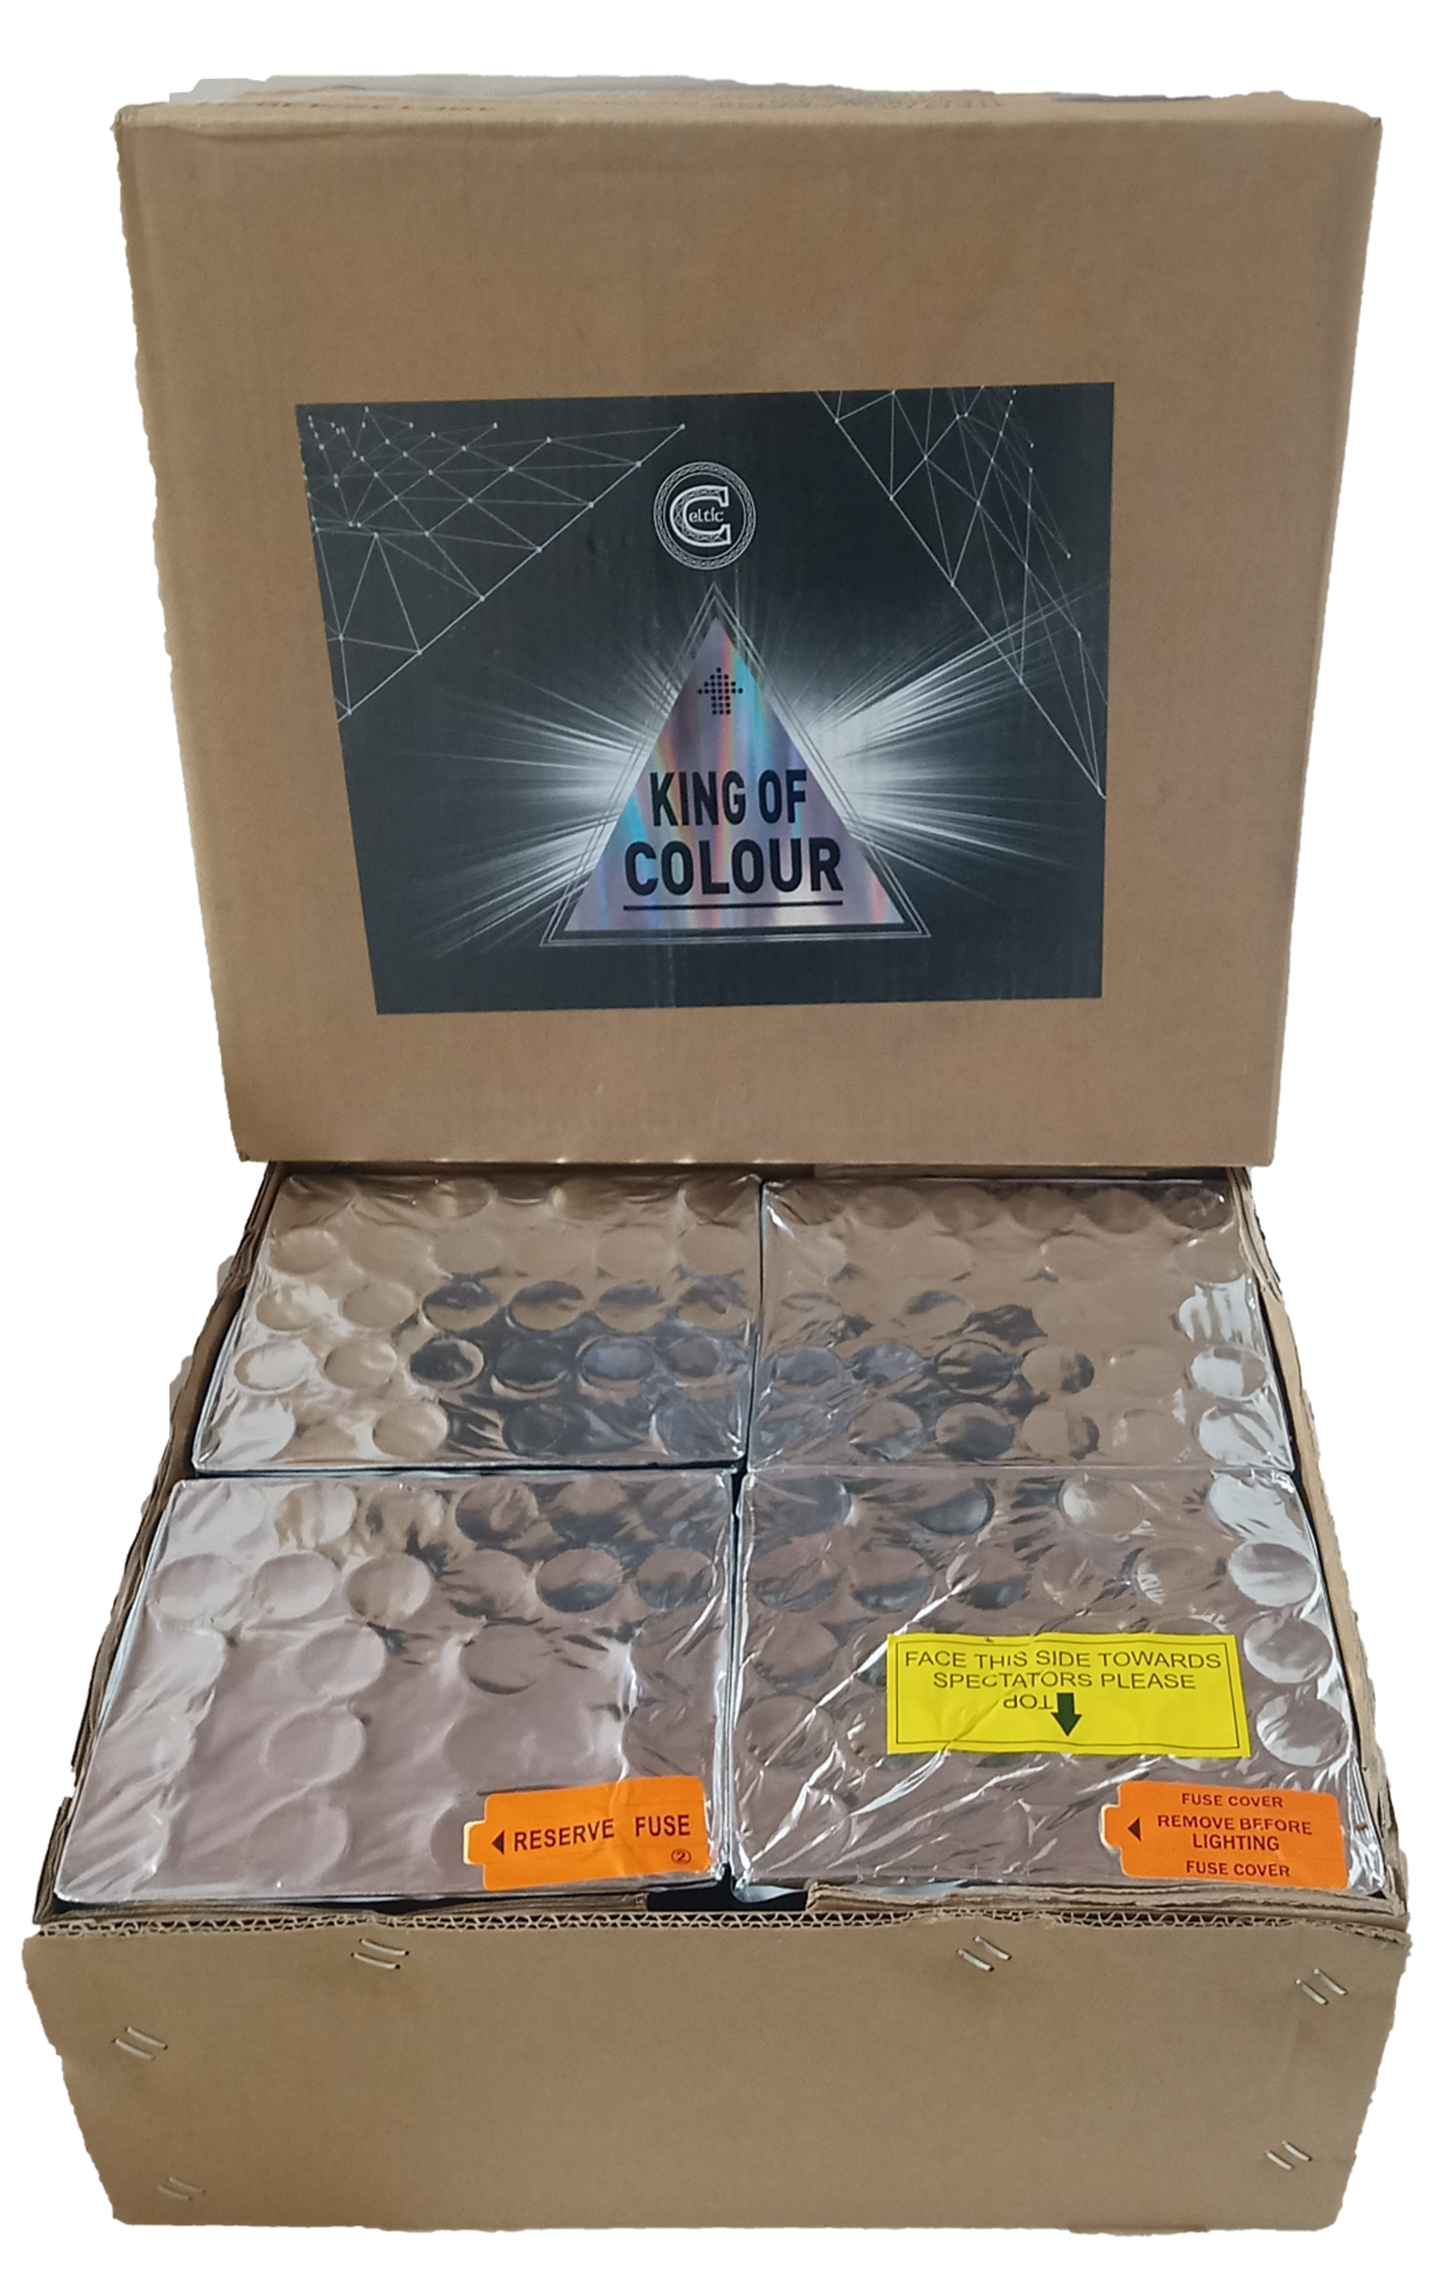 King of Colour by Celtic Fireworks Open Box